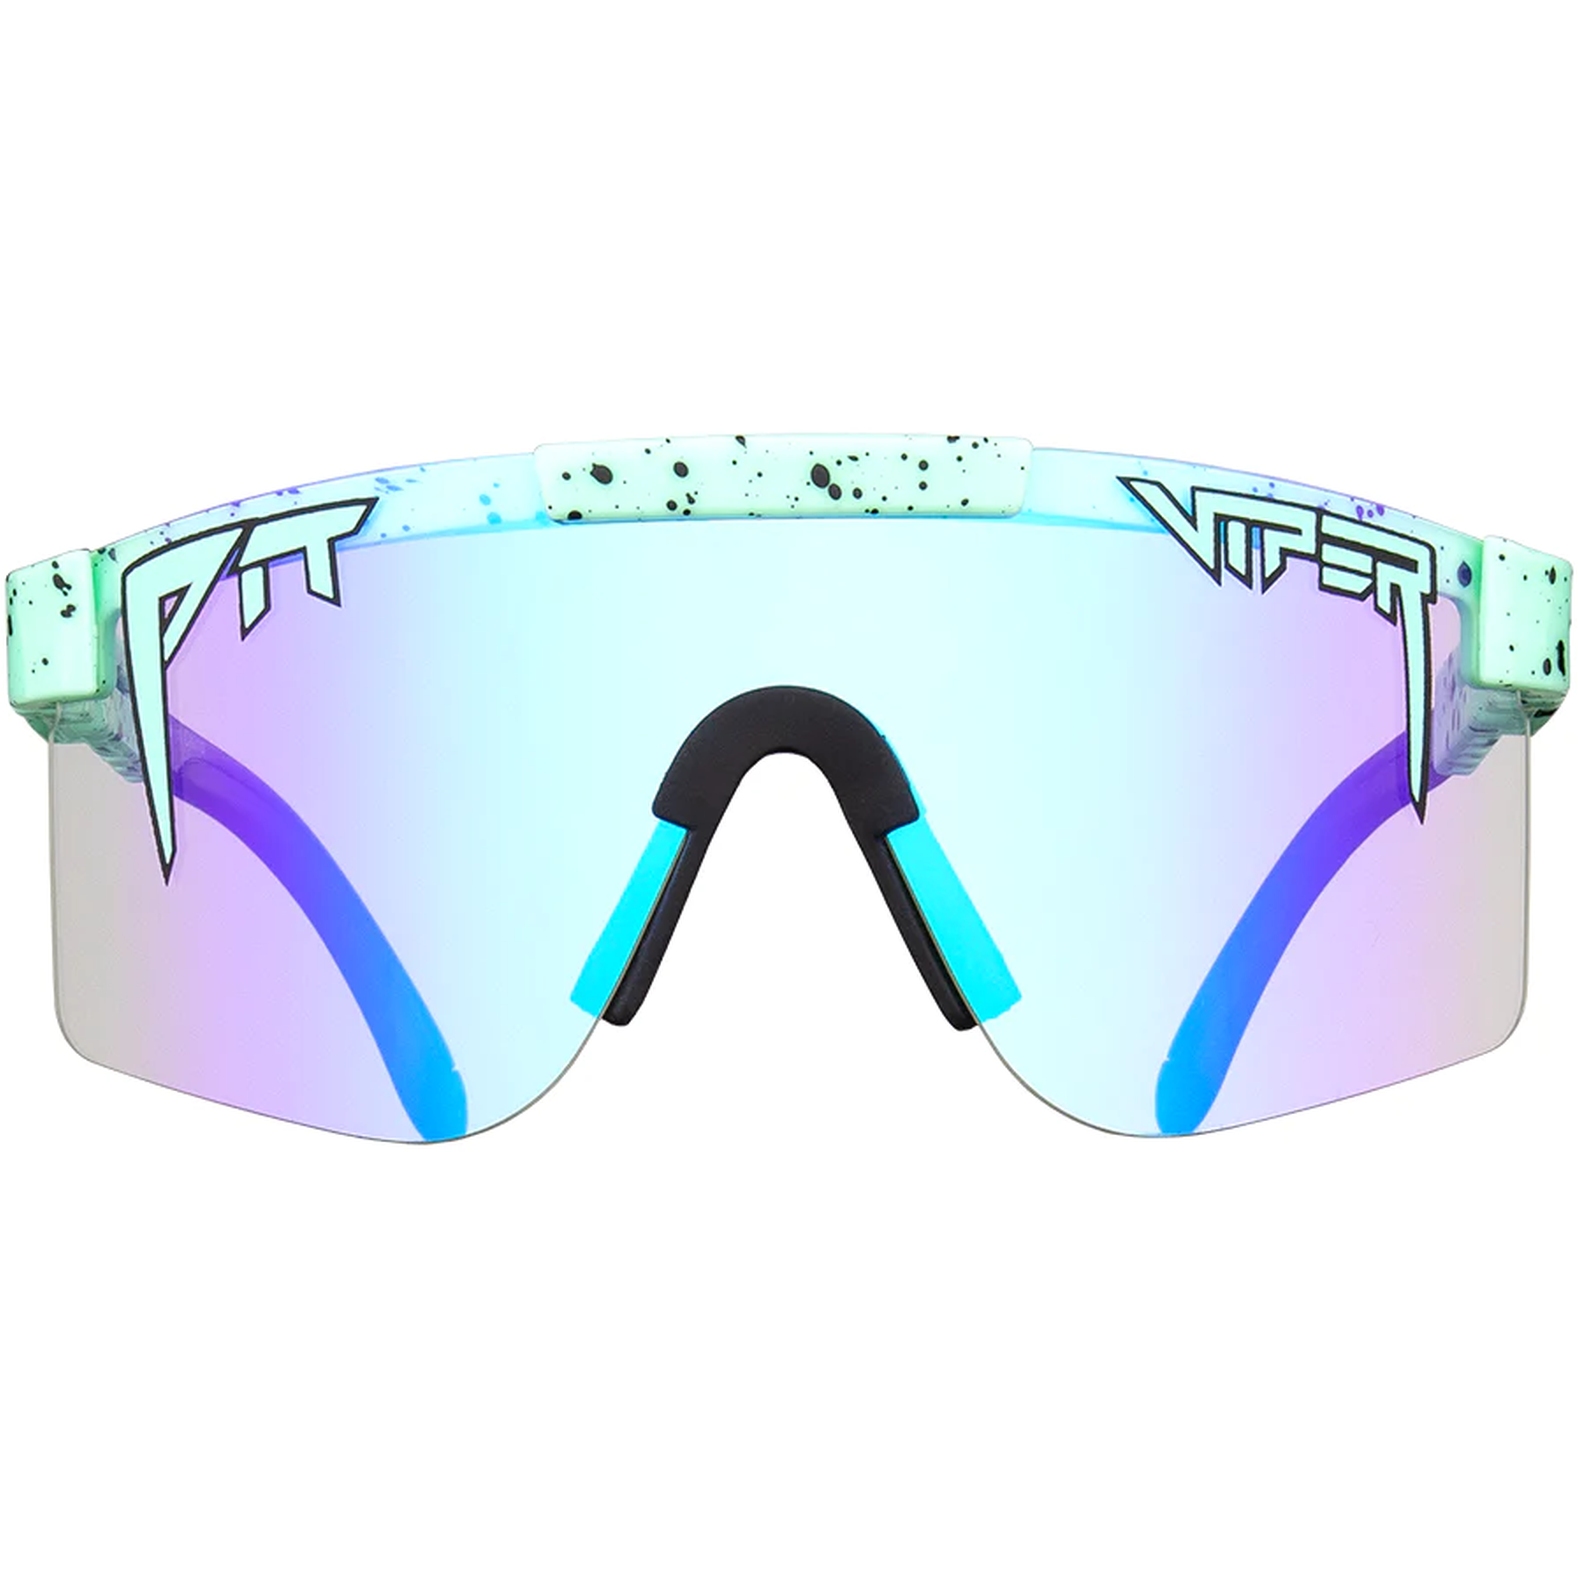 Picture of Pit Viper The Originals Glasses - Single Wide - The Poseidon Night Shade / Blaster Lens